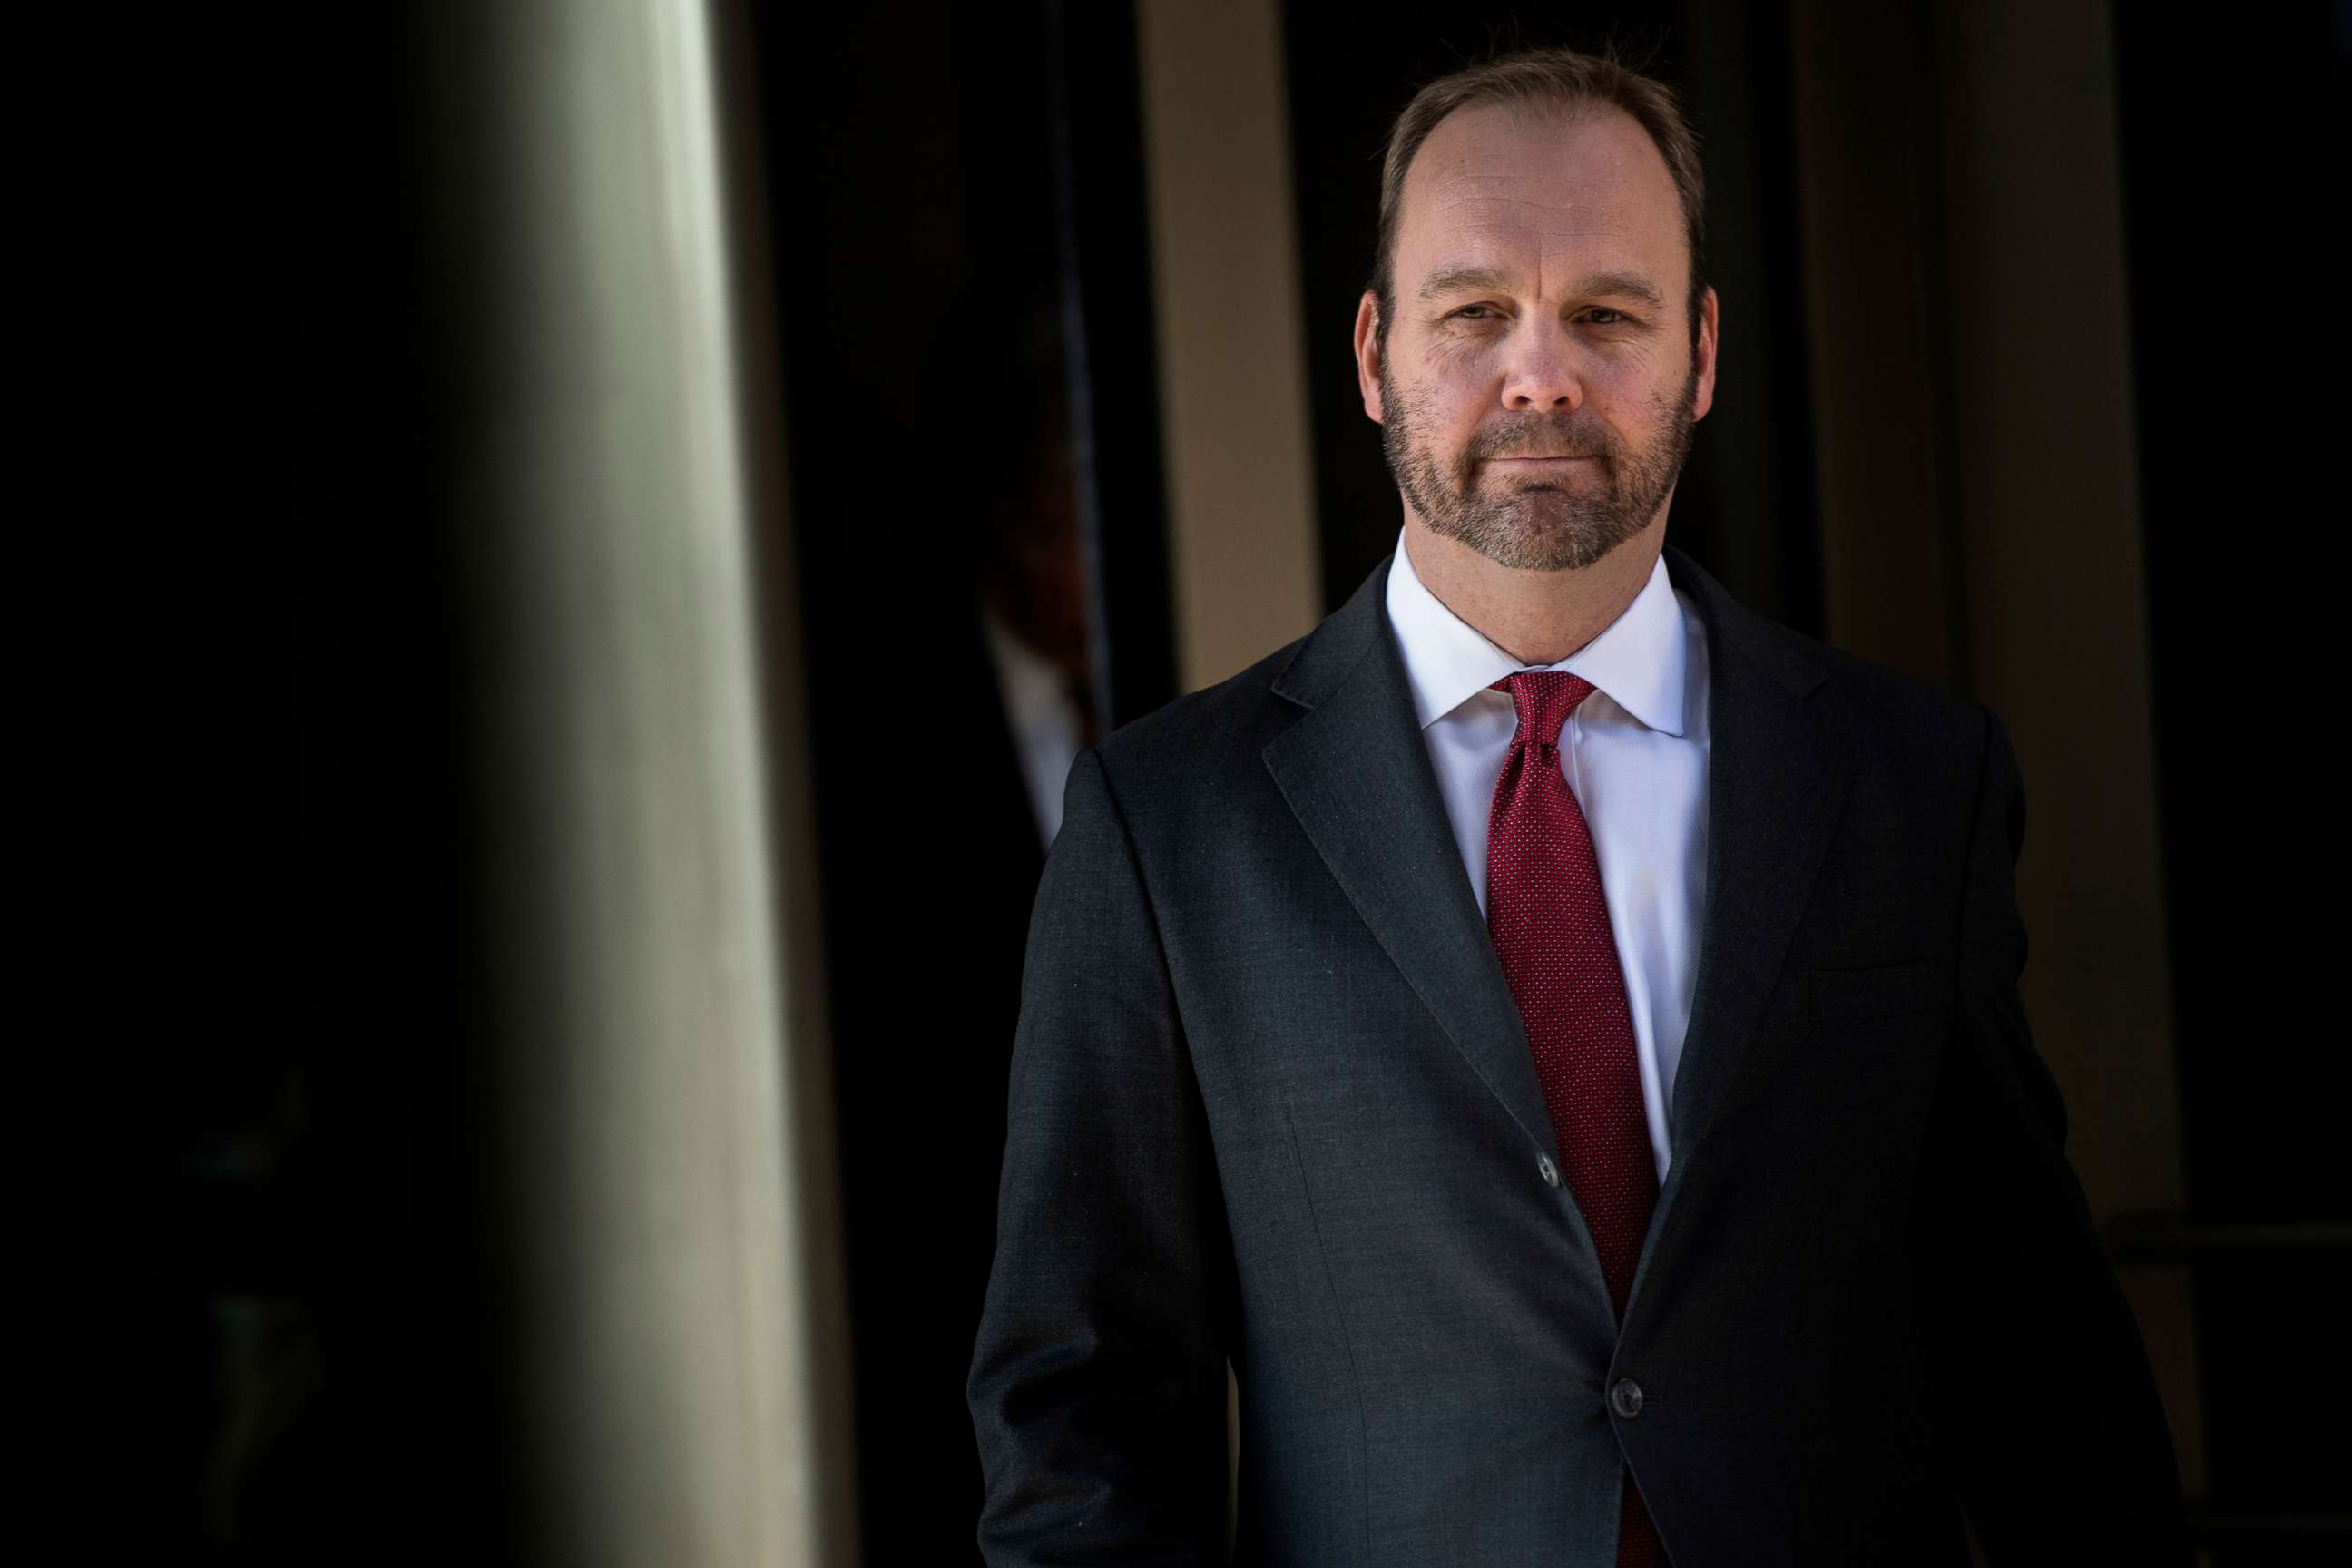 PHOTO: Former Trump campaign official Rick Gates leaves Federal Court in Washington, D.C., Dec. 11, 2017.